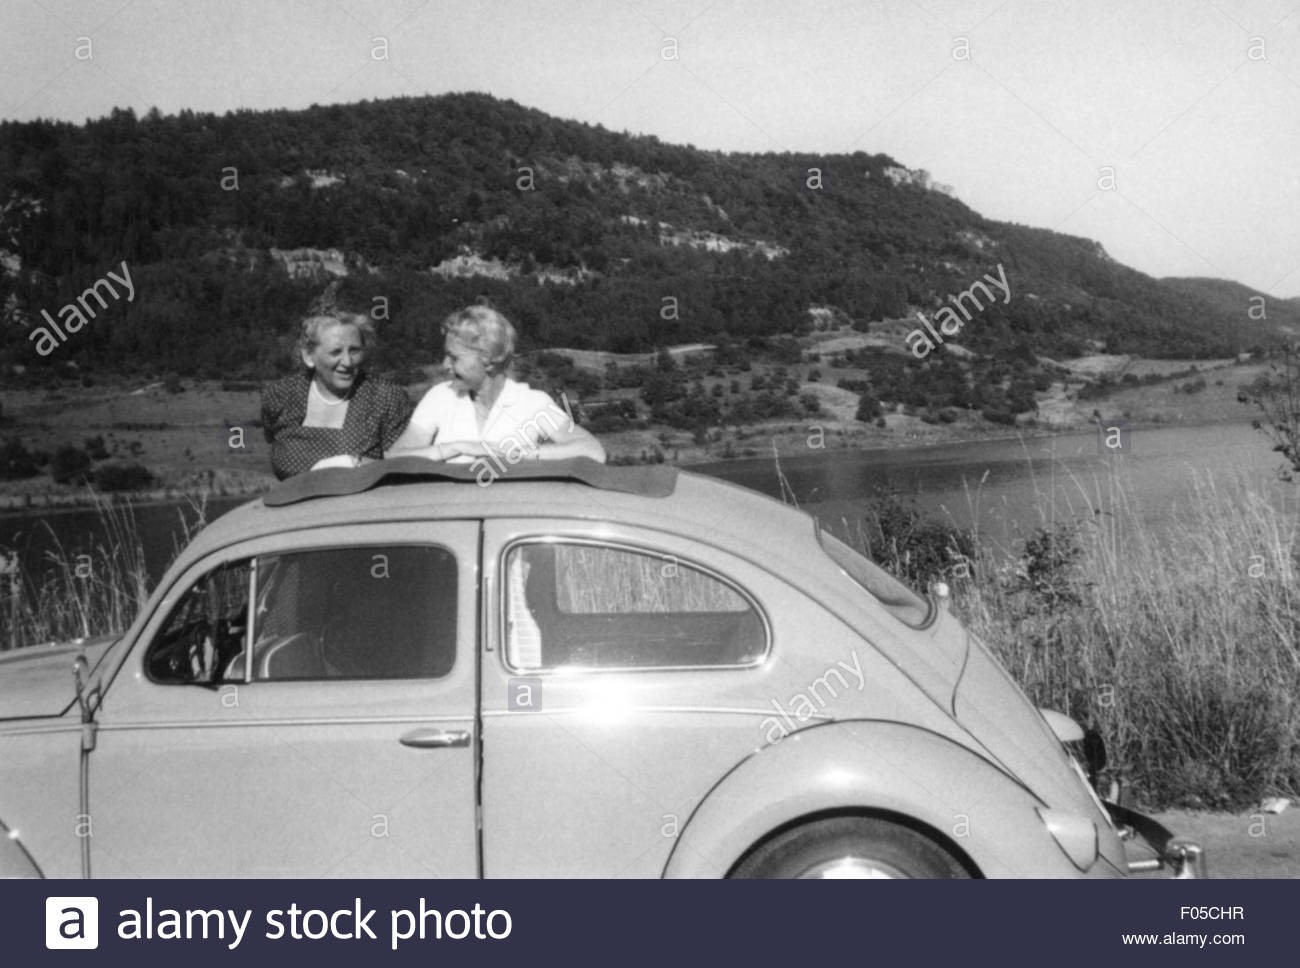 Leisure time excursion. Two women in front of VW Beetle having a break on a roadtrip in 1950s. 